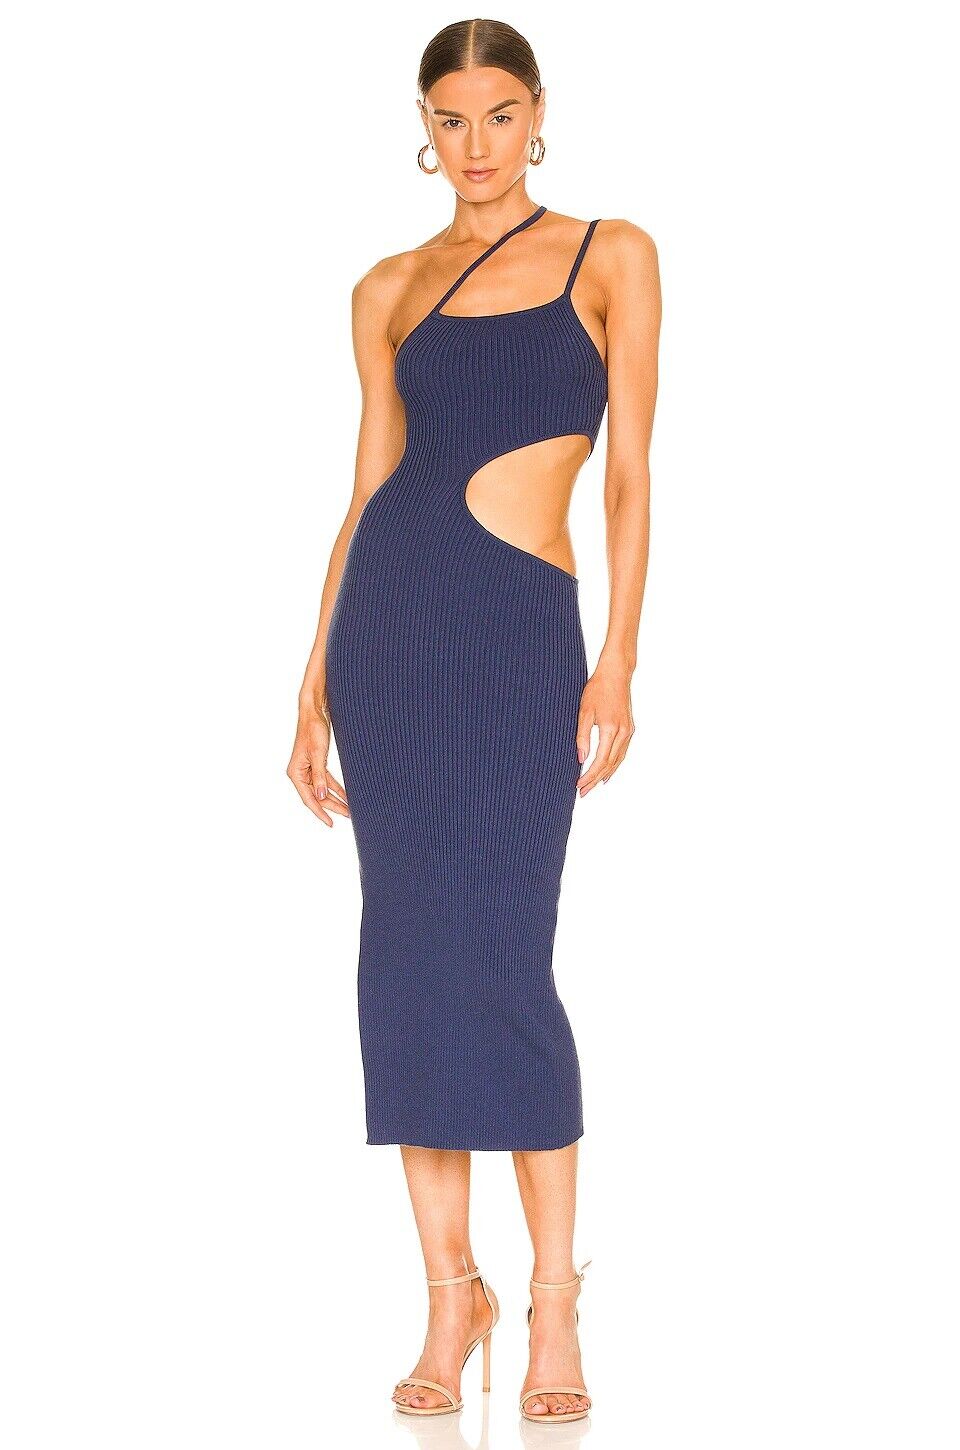 h:ours Evelyne Cut Out Knit Dress in Midnight Blue - sizes XS-L